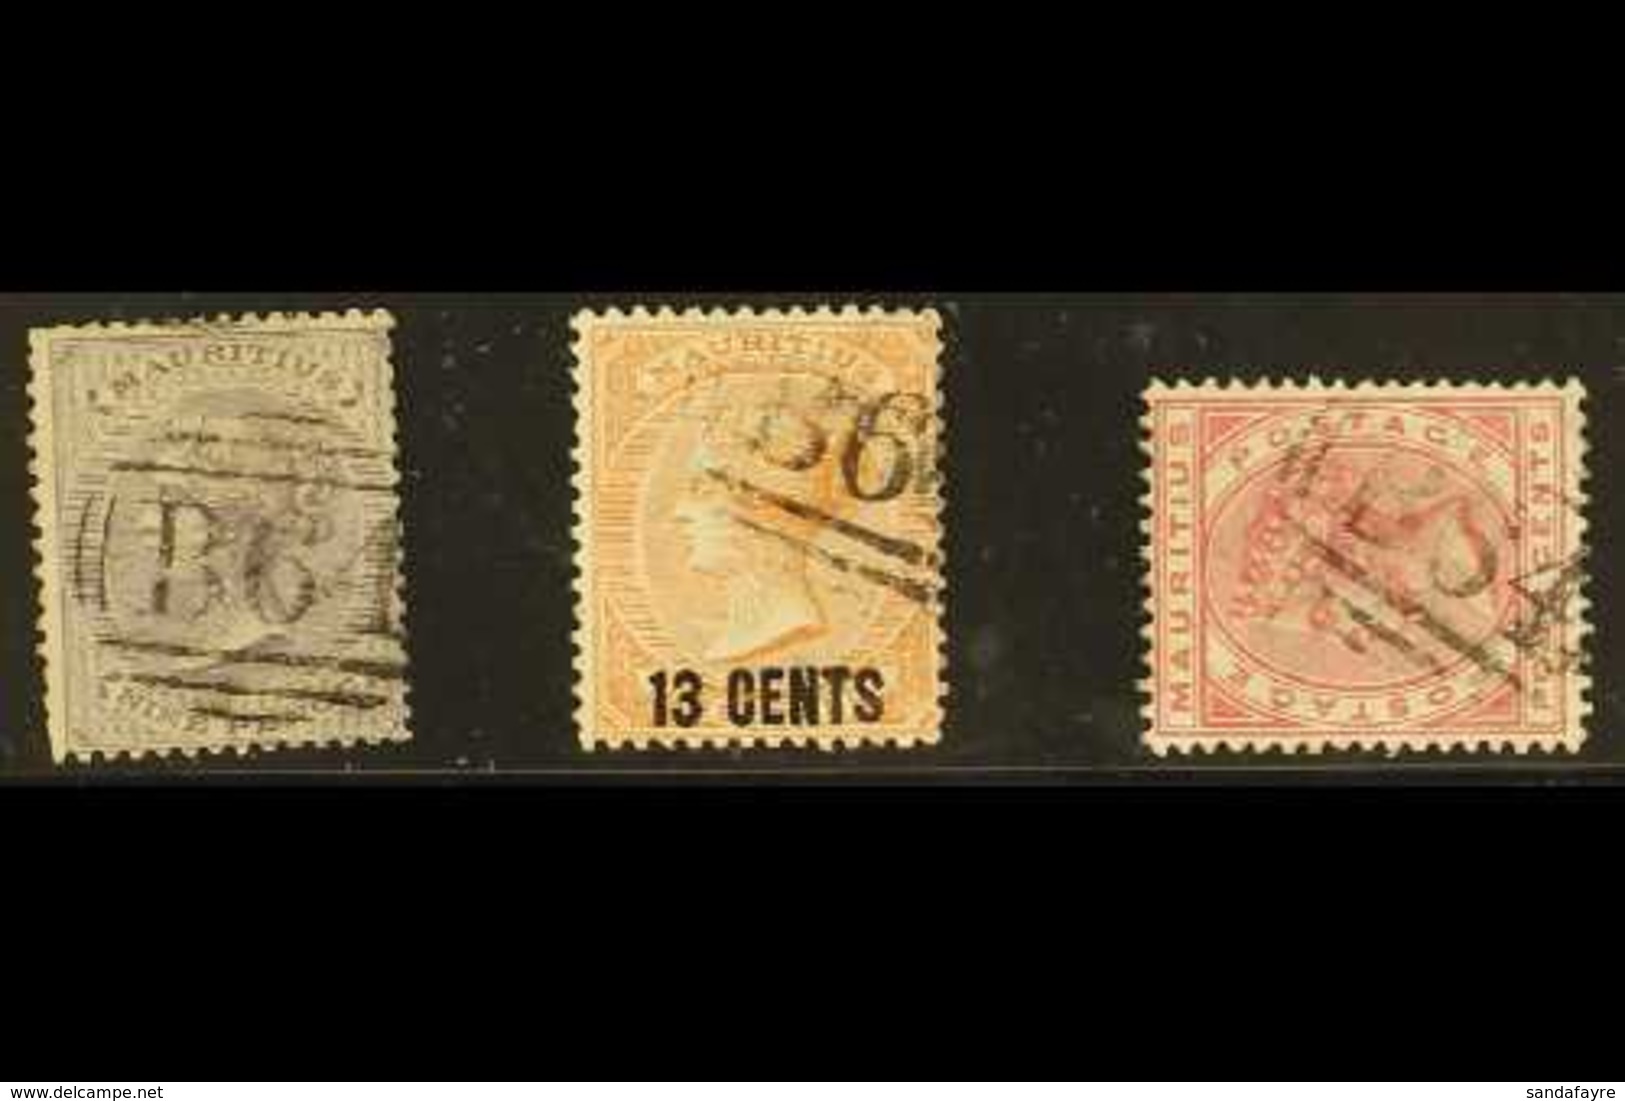 MAURITIUS USED IN SEYCHELLES Fine Used Selection With "B64" Cancels, Comprising 1860-63 9d Dull Purple (SG Z10), 1878 13 - Seychelles (...-1976)